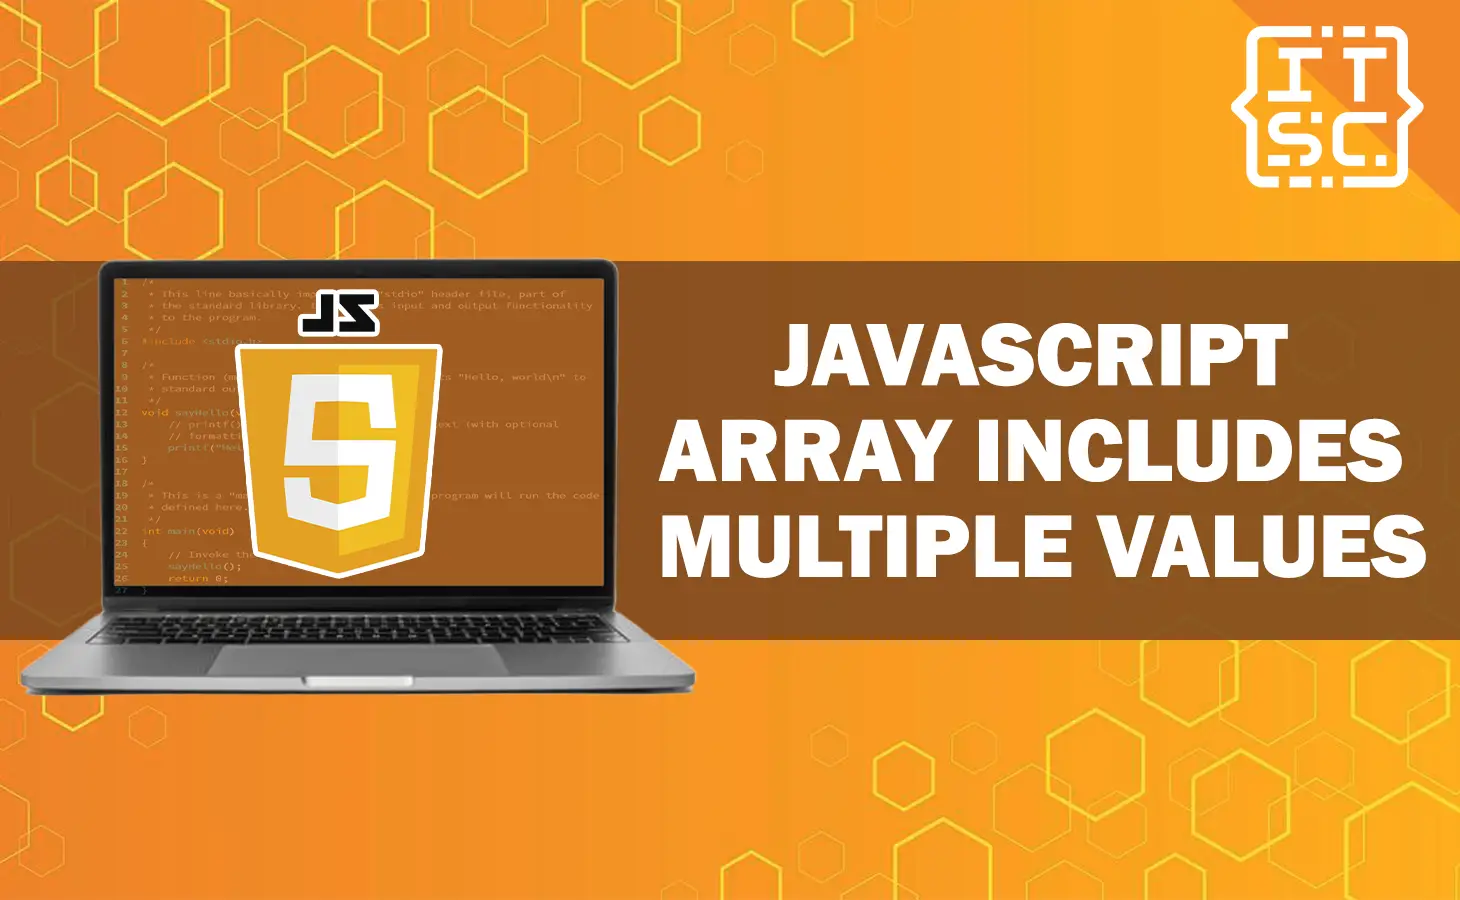 How to check javascript array includes multiple values?